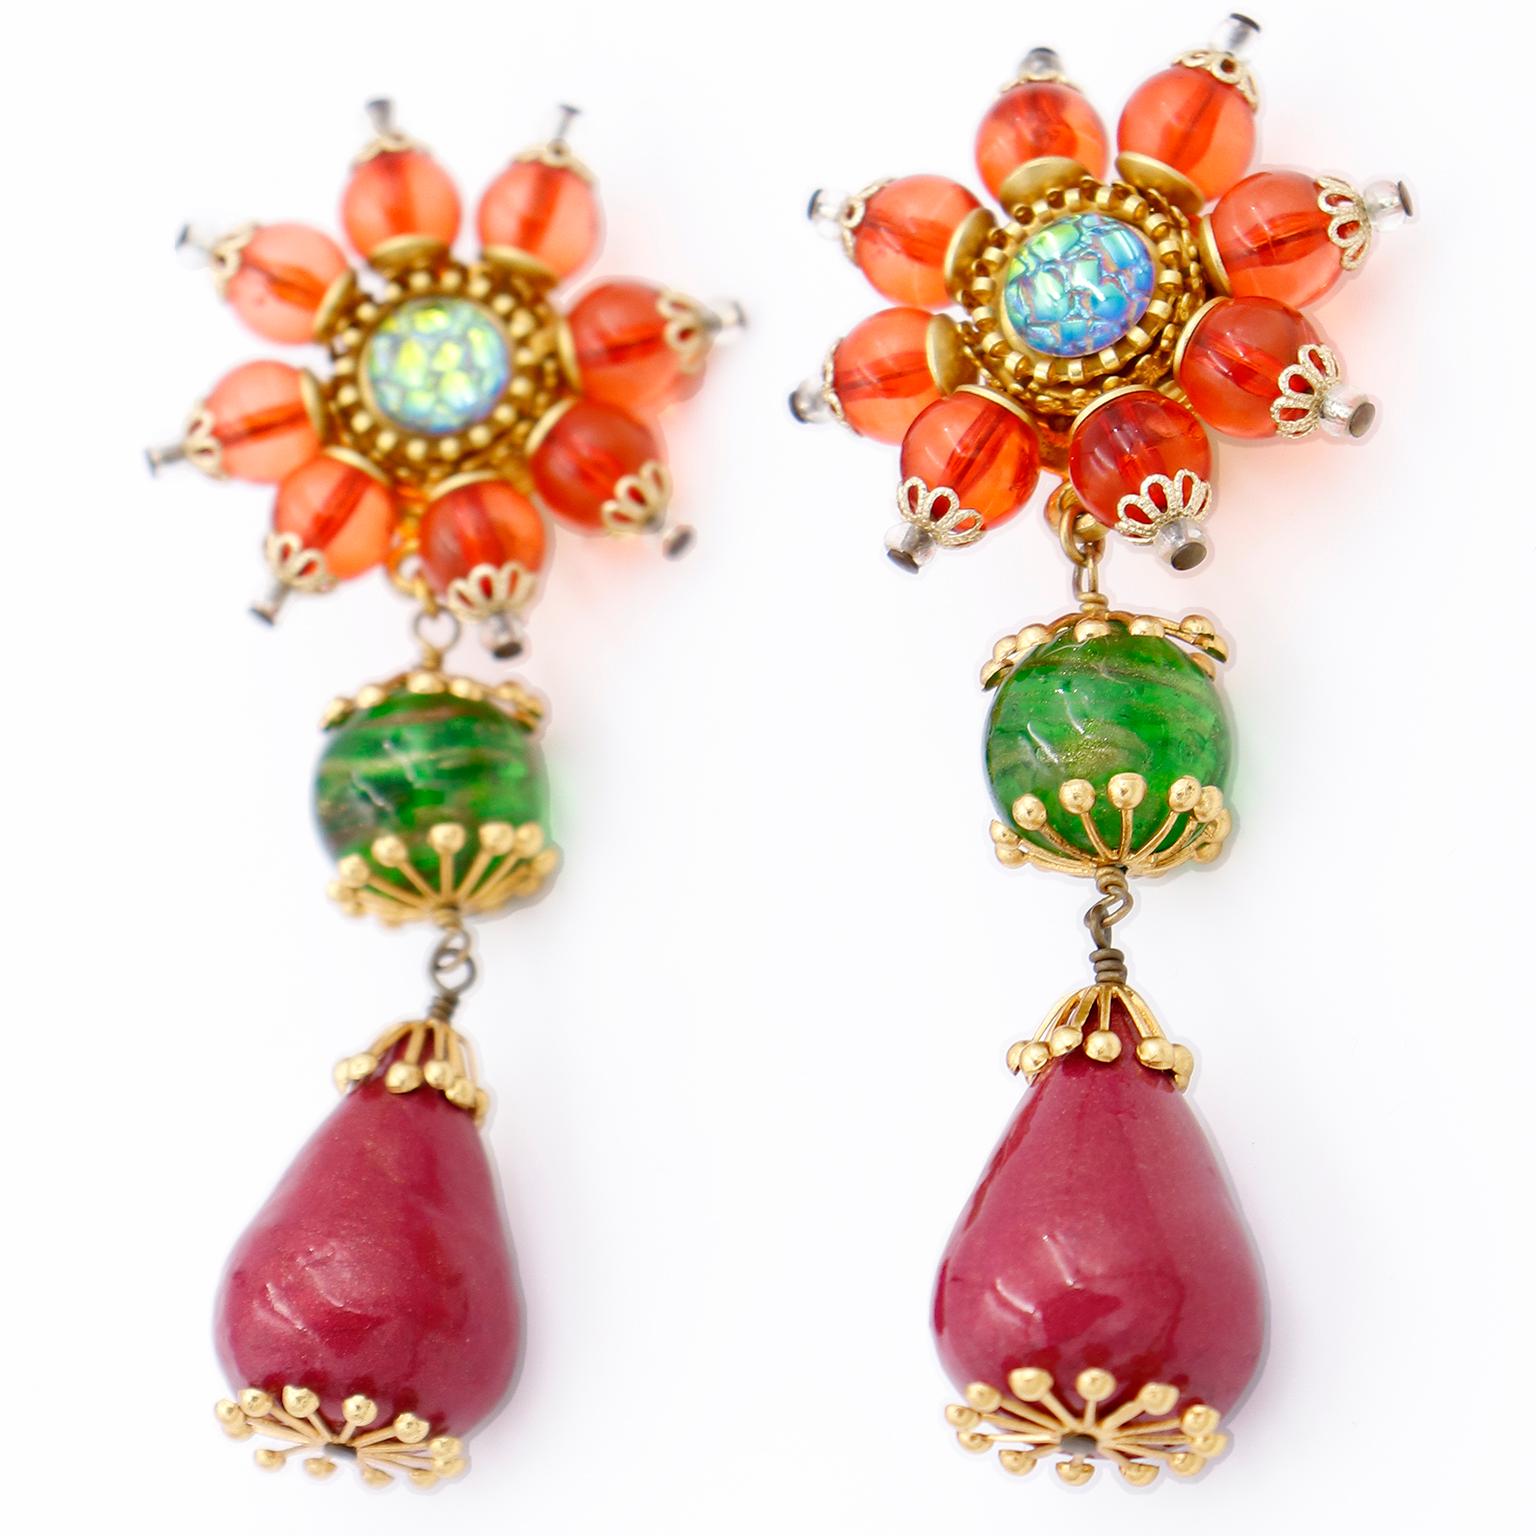 We love vintage Christian Lacroix jewelry and these earrings are incredible! These stunning Christian Lacroix 1990's statement earrings are in gorgeous shades of orange, green, and dark magenta with gold and clear details. These colorful resin